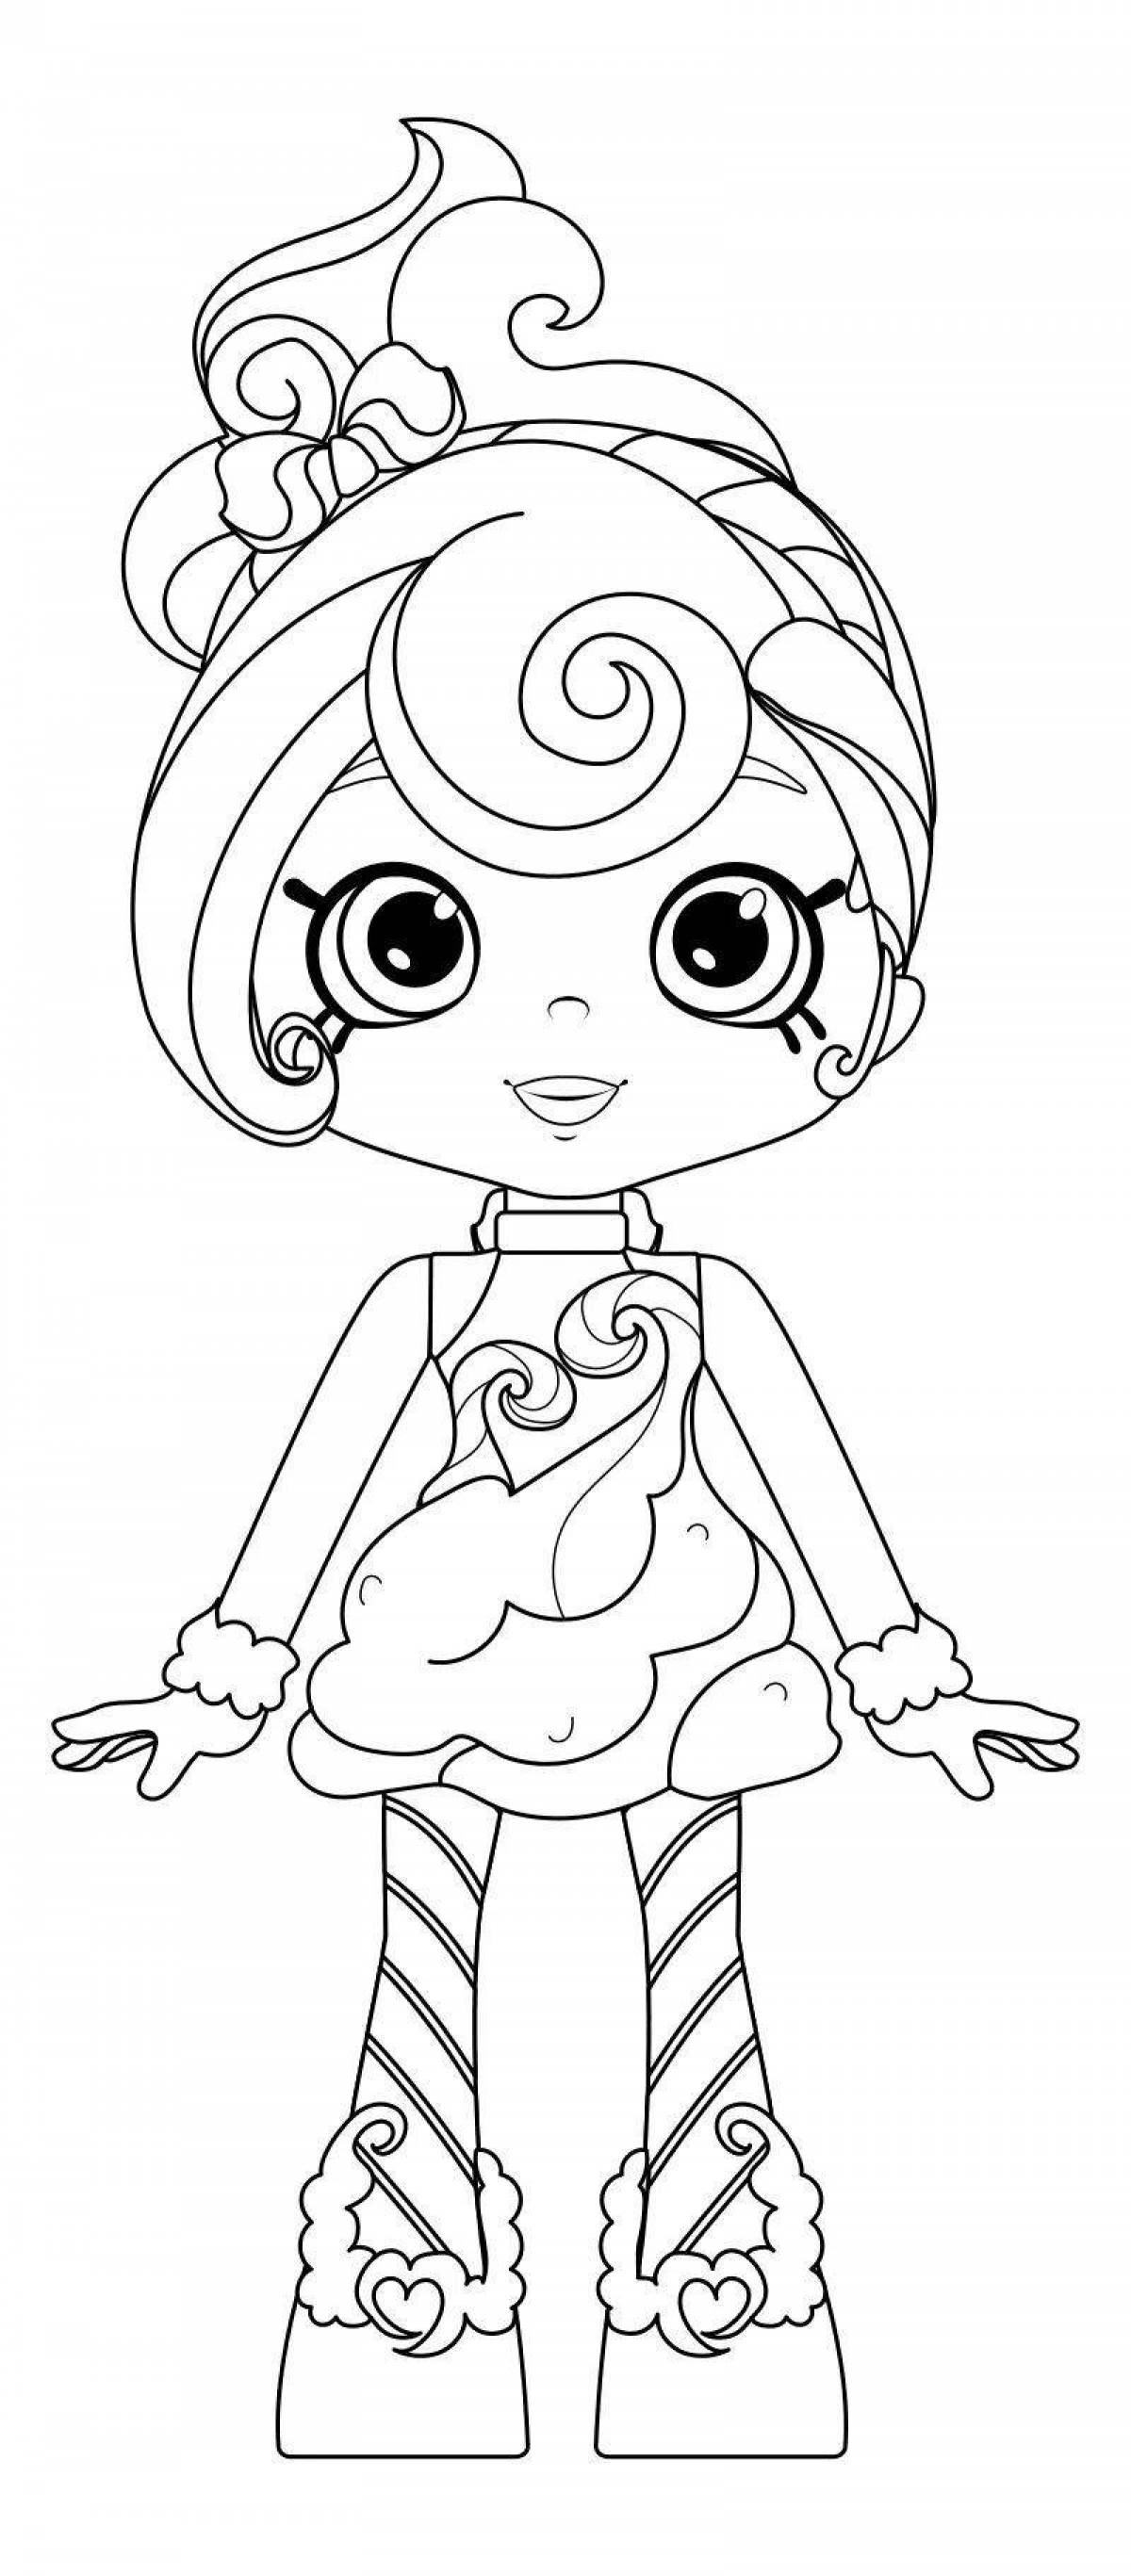 Playful chachimol coloring page